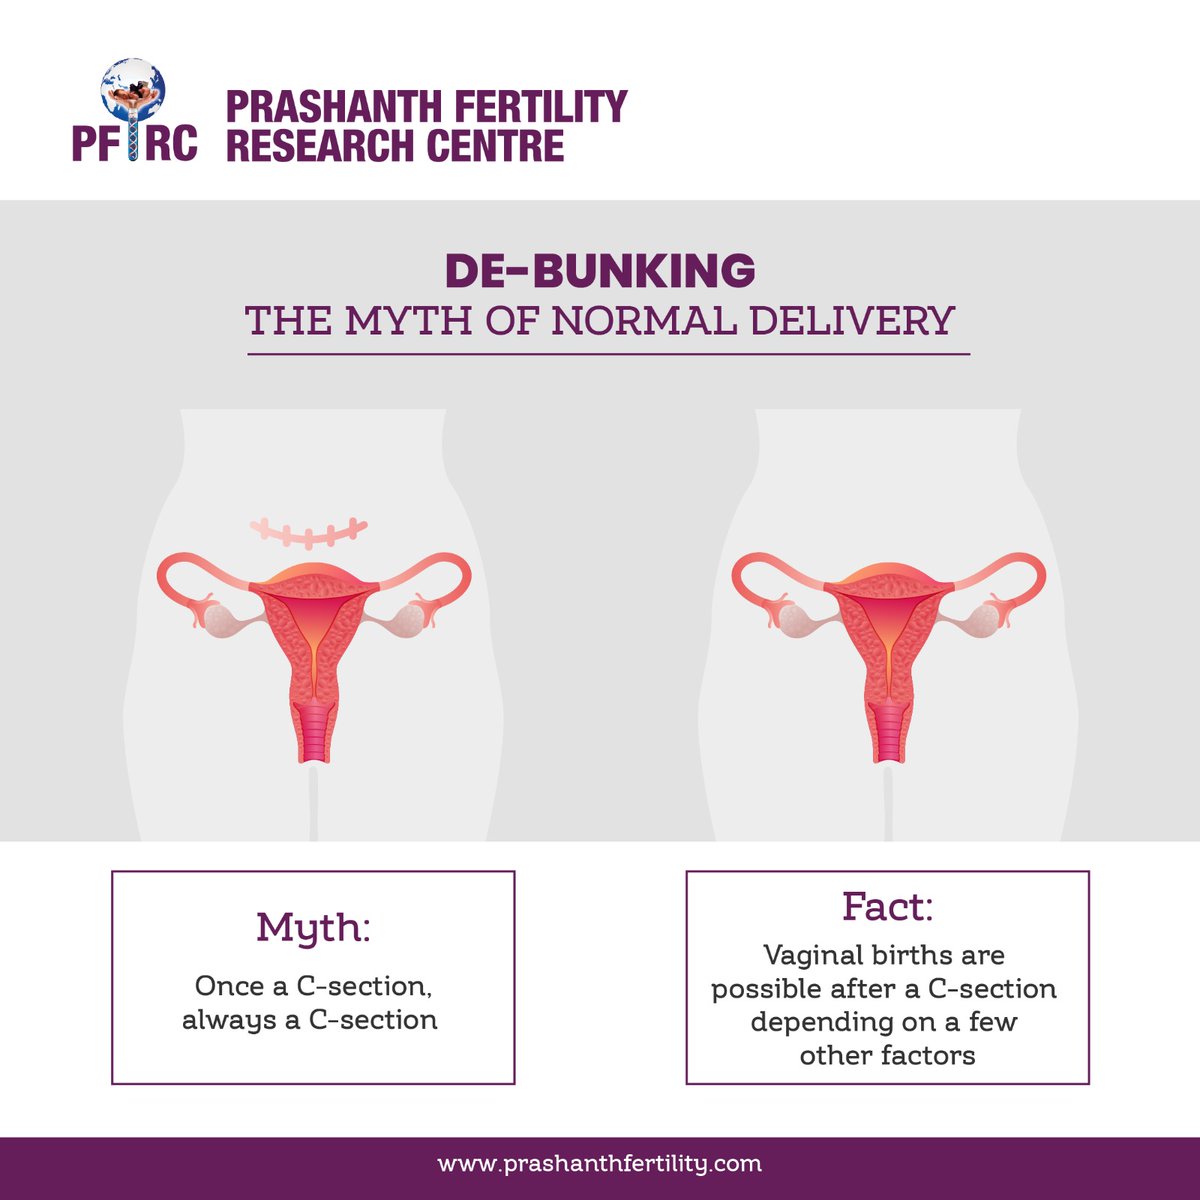 Debunking some prevalent misconceptions and shedding light on the reality behind a myth that's been around for ages.  #FertilityFacts #MythBusters #FertilityTruths
#ReproductiveHealth  #DebunkingMyths #fertilitytreatment #iui #ivf #prashanthfertility